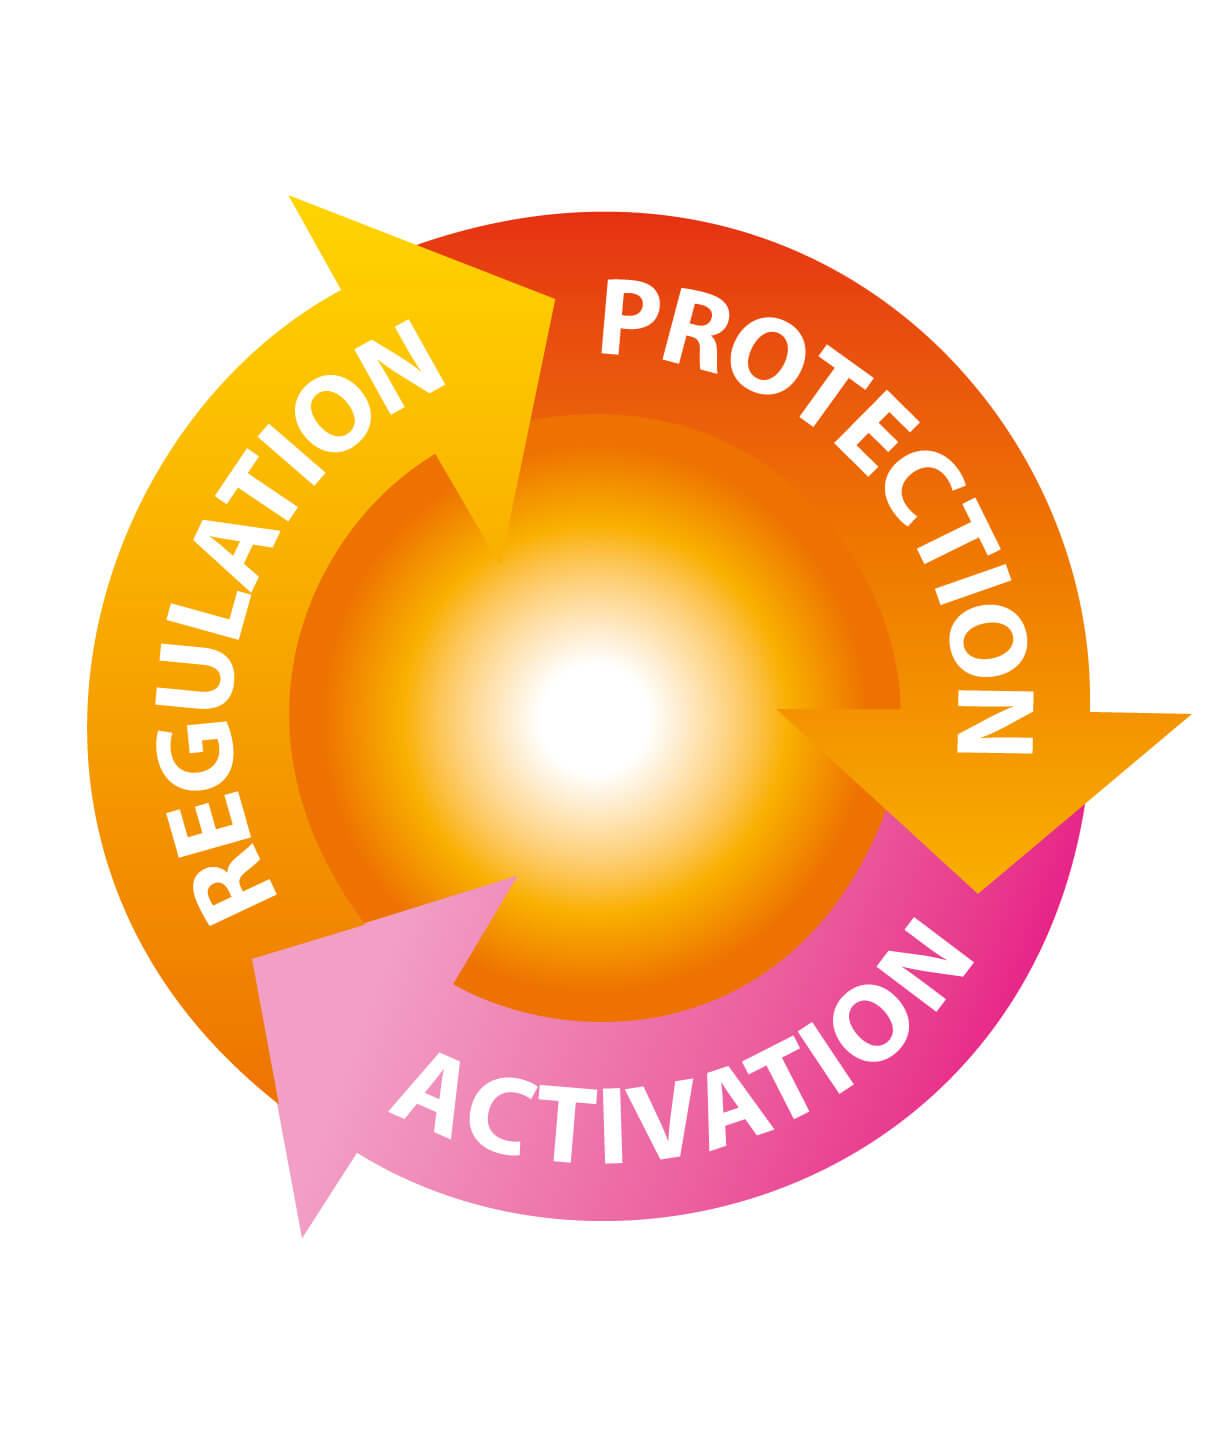 Regulation - Protection - Activation